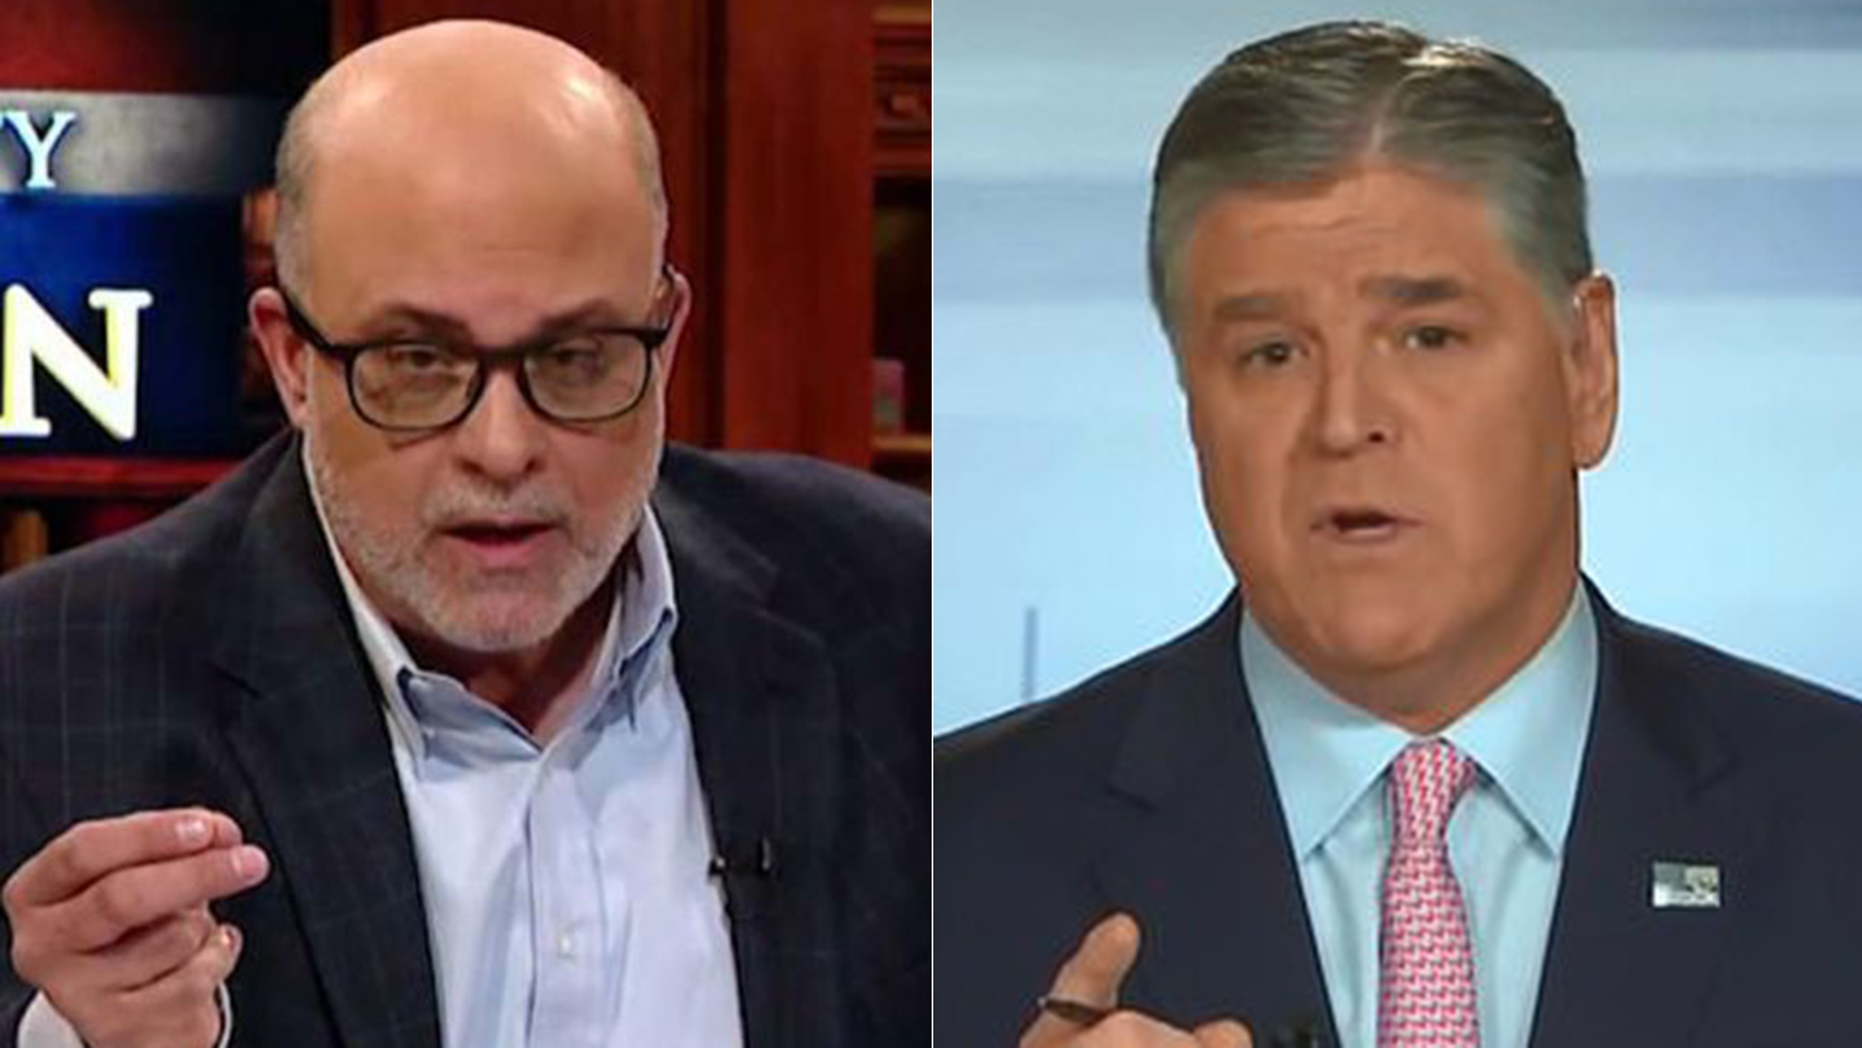 Mark Levin told Sean Hannity the media has made an all-out push to 'take the president out' during a special episode of 